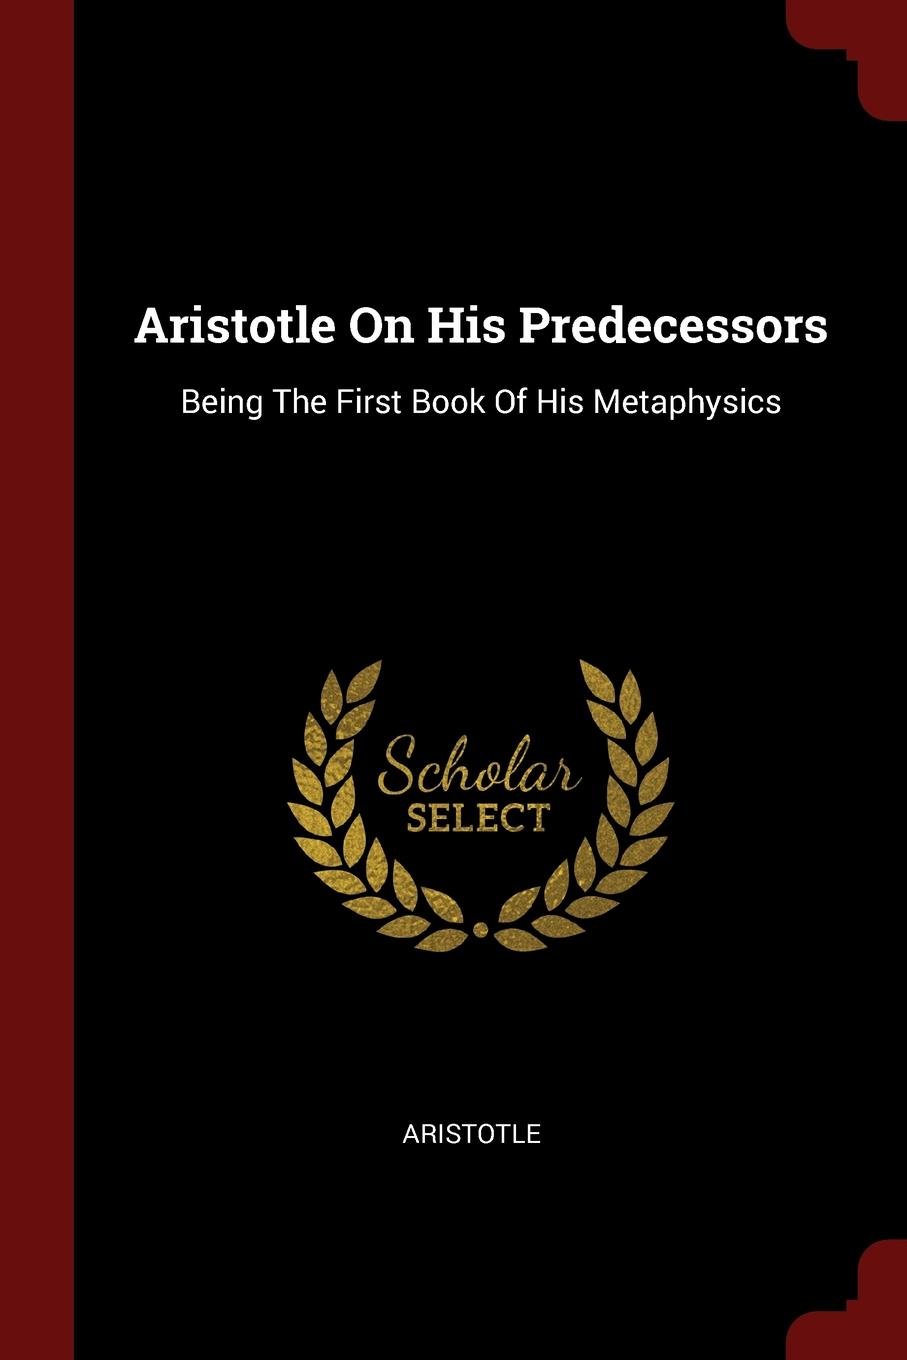 Aristotle On His Predecessors. Being The First Book Of His Metaphysics